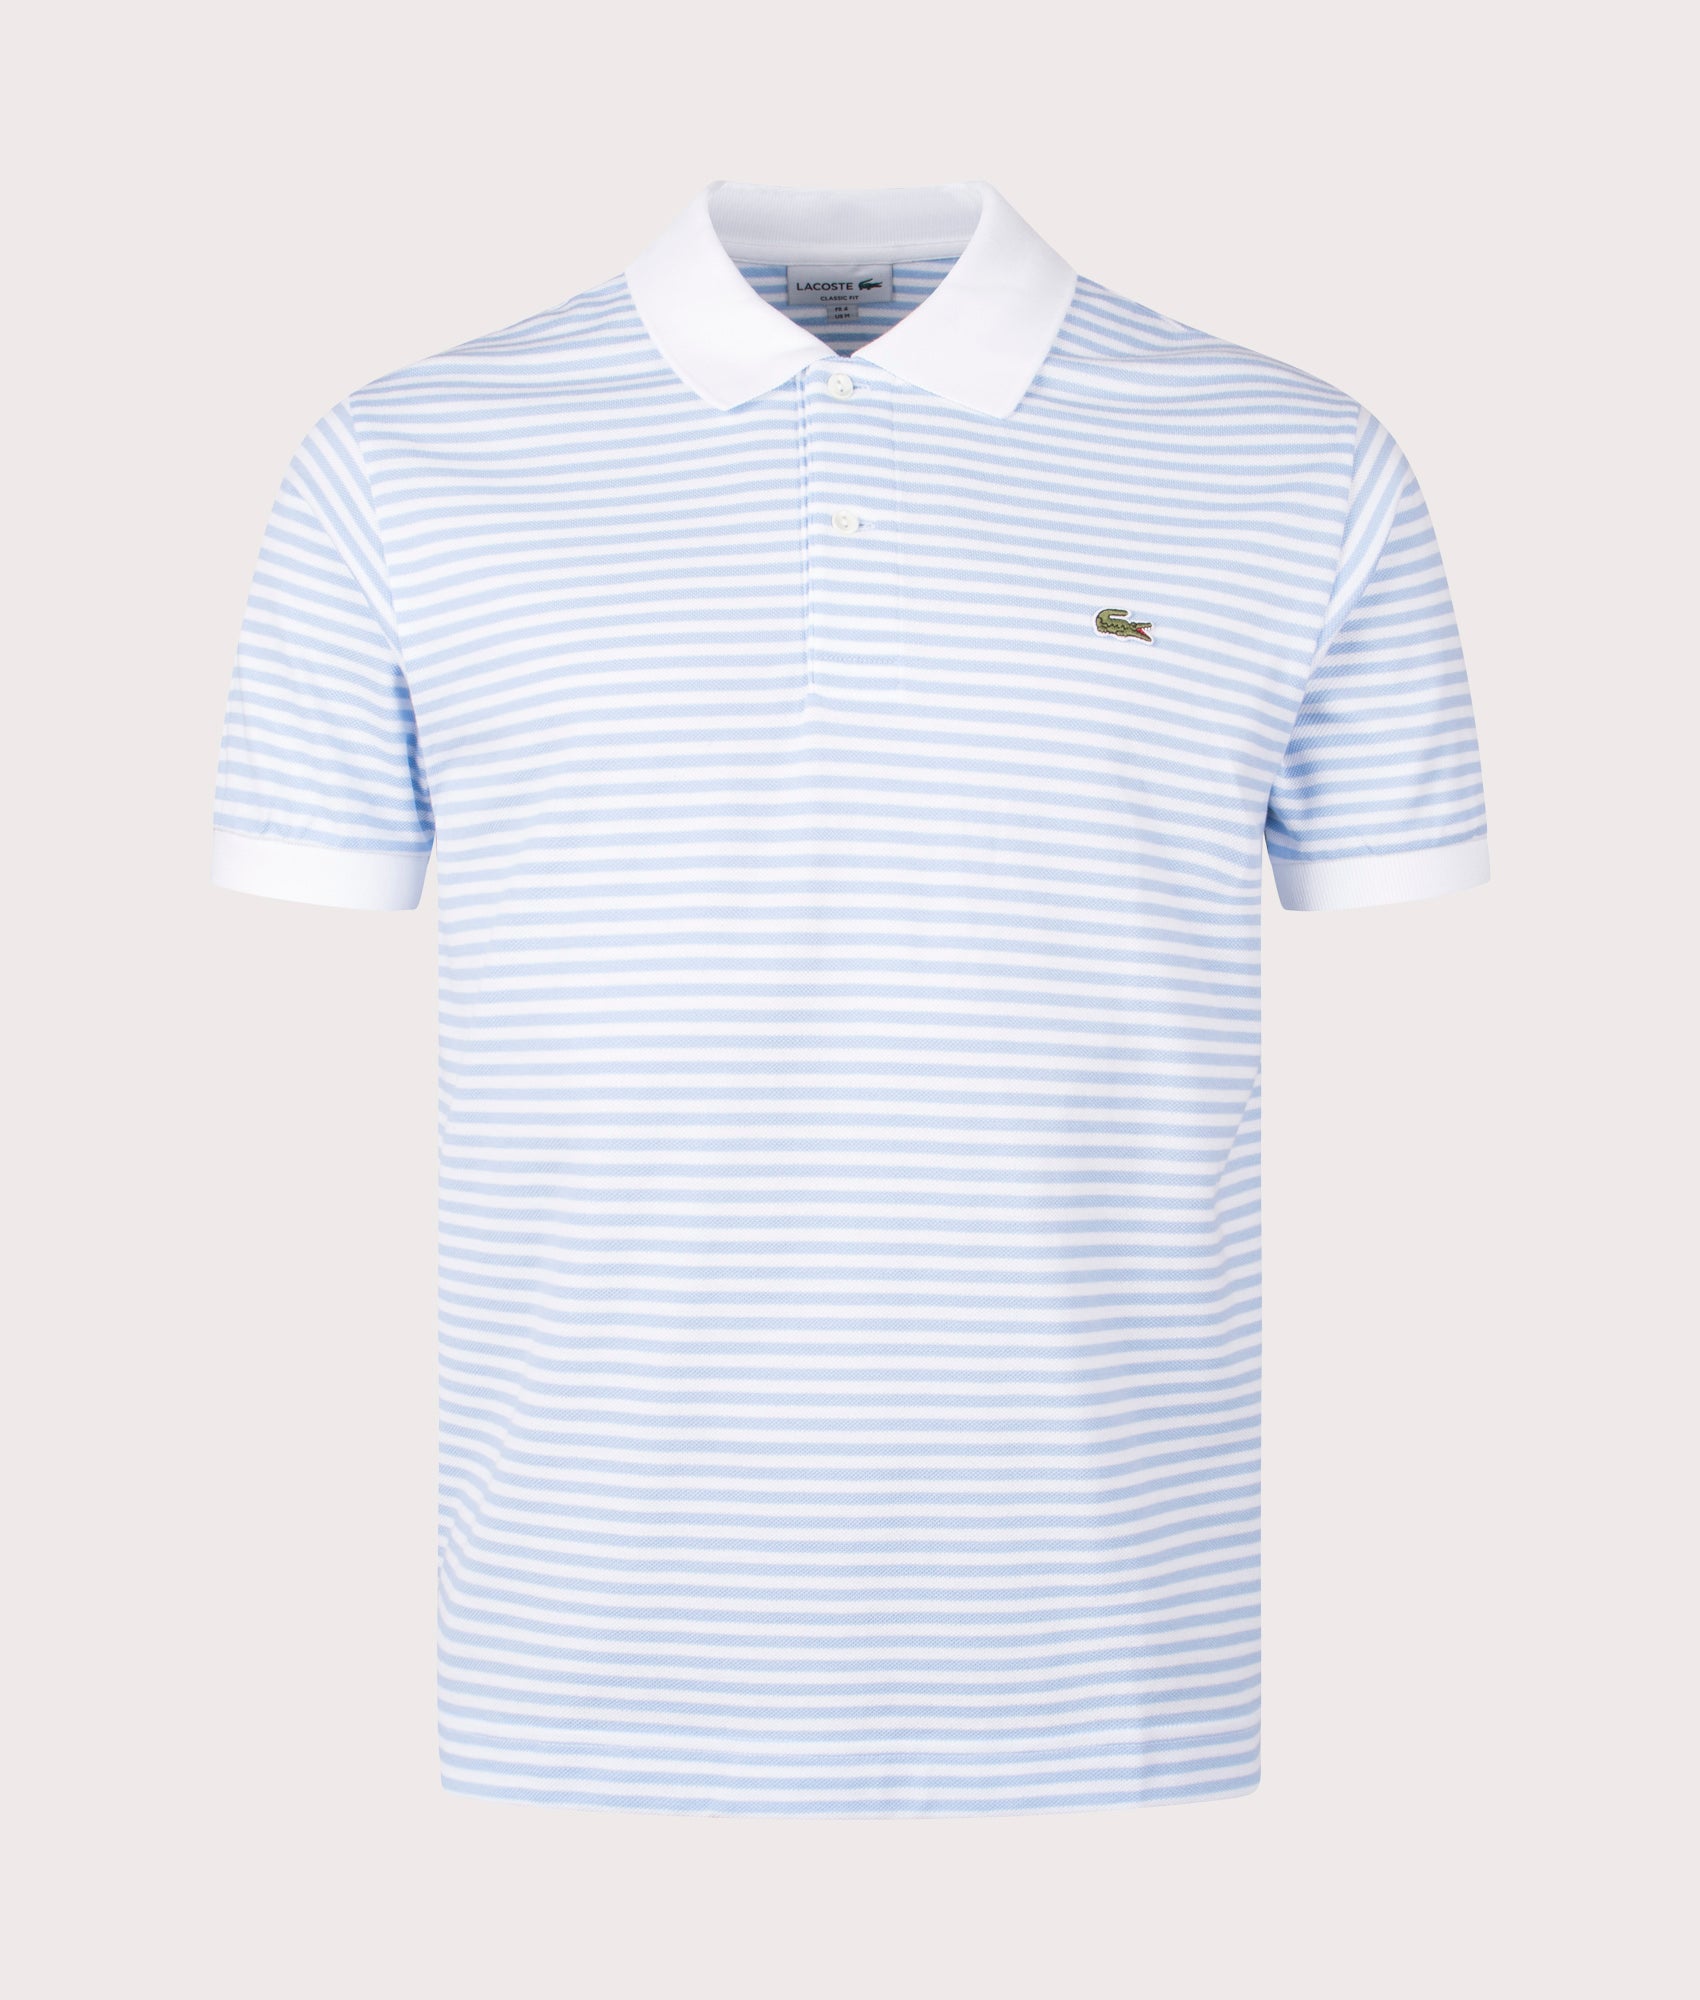 Lacoste Mens Ribbed Collar Striped Polo Shirt - Colour: F6Z White/Overview - Size: 6/XXL